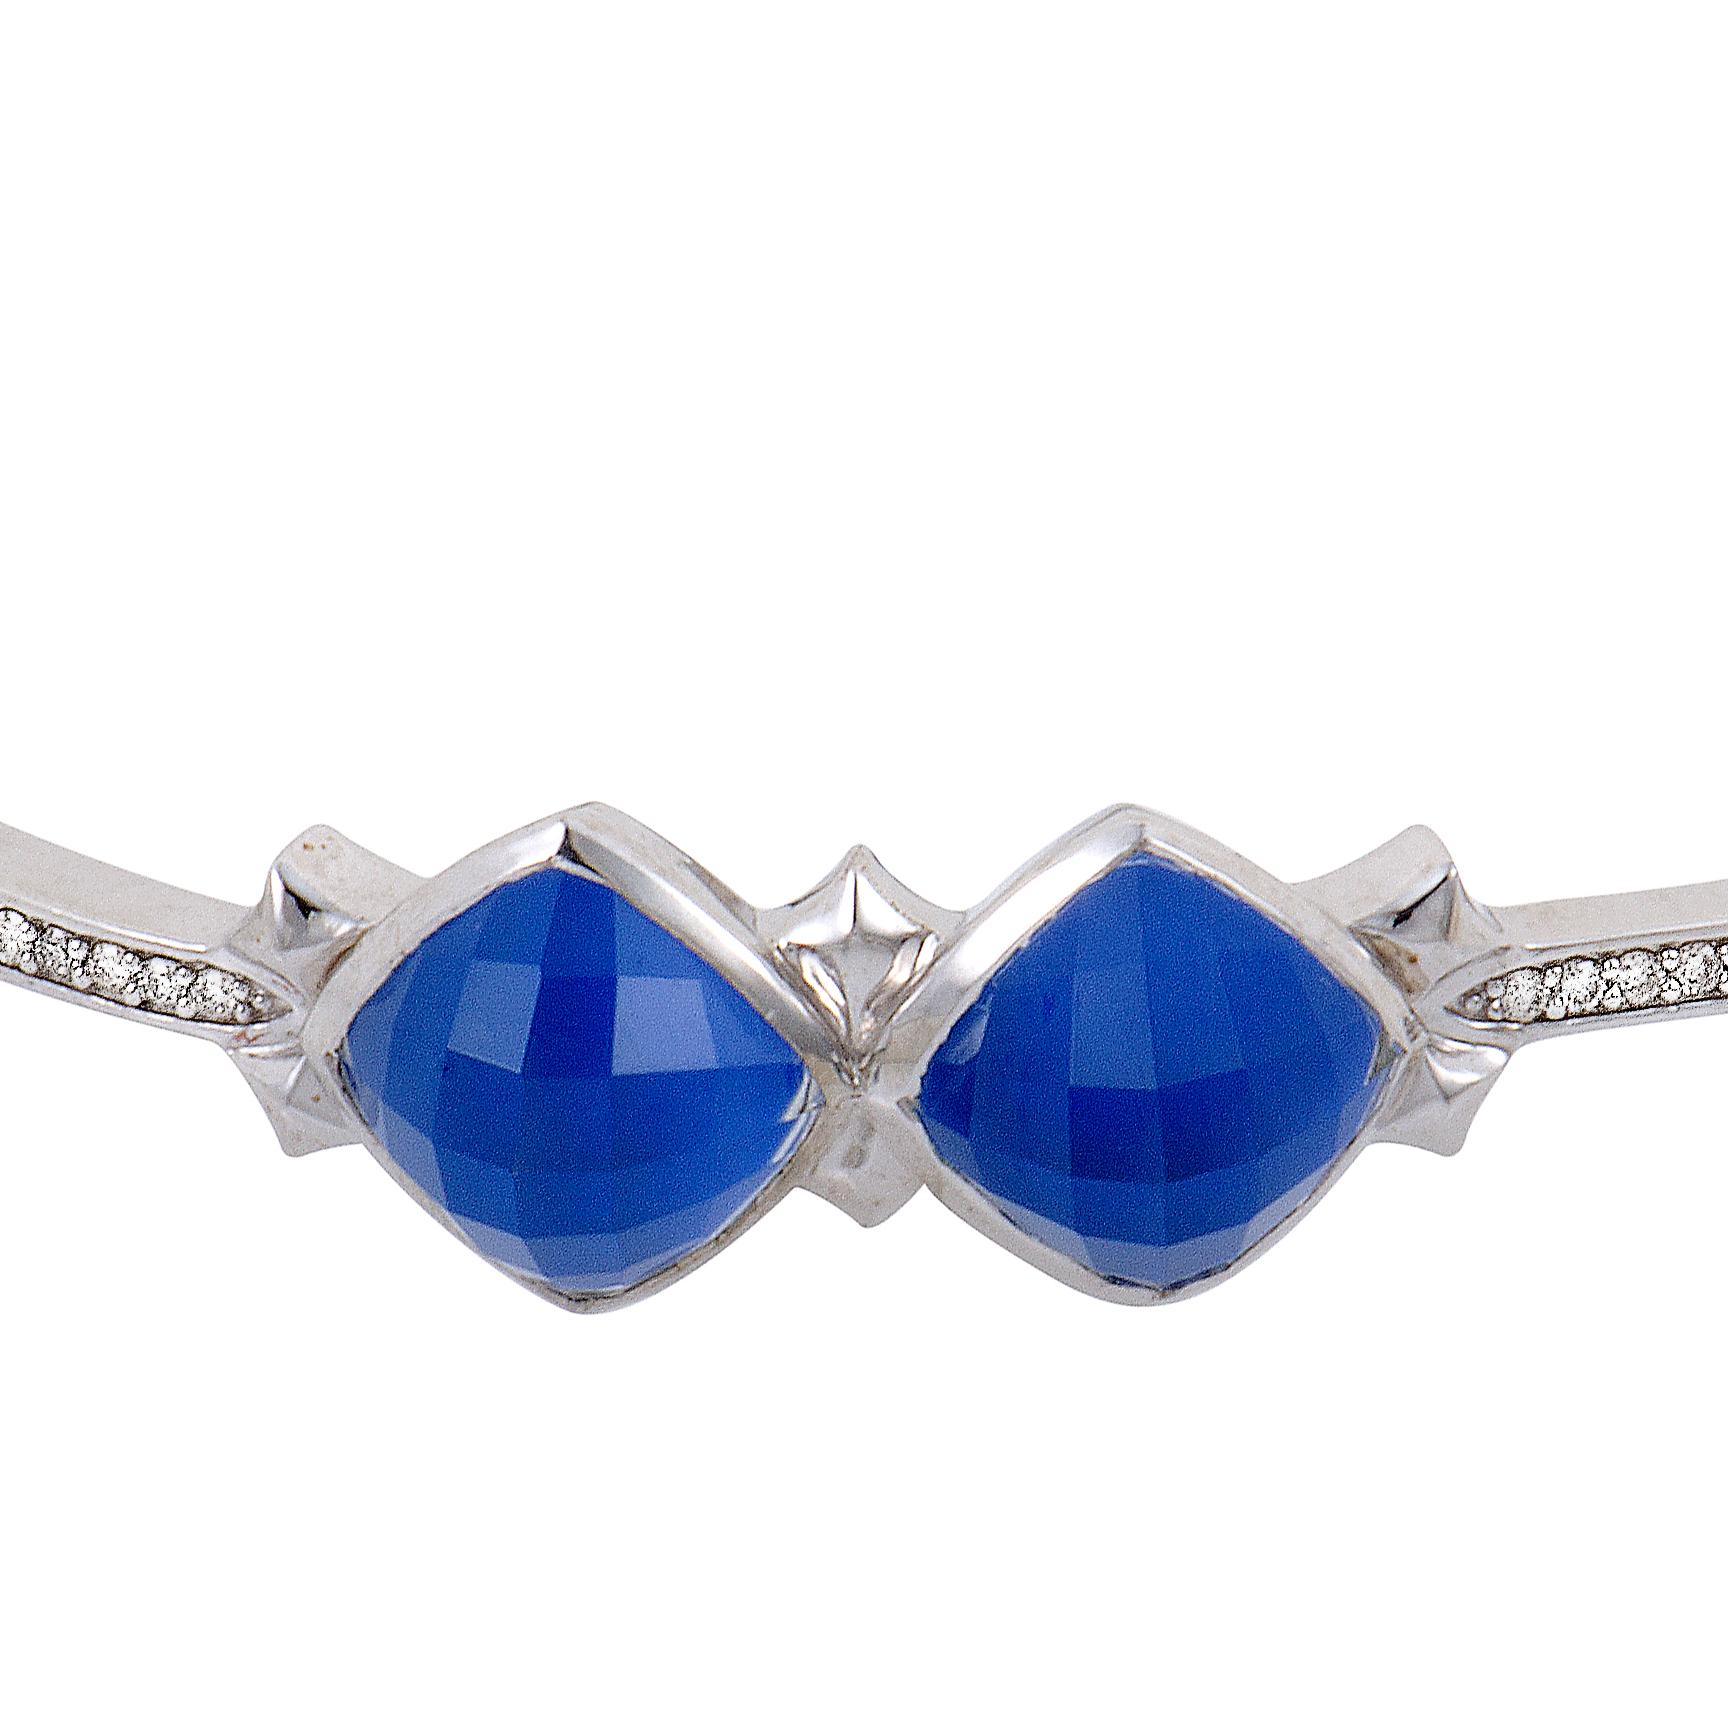 Exquisitely cut gems, fantastic color and an elegantly tasteful overall appearance produce an irresistible allure in this sublime bangle from Stephen Websters Superstud collection made of white rhodium-plated silver with blue agate, quartz and